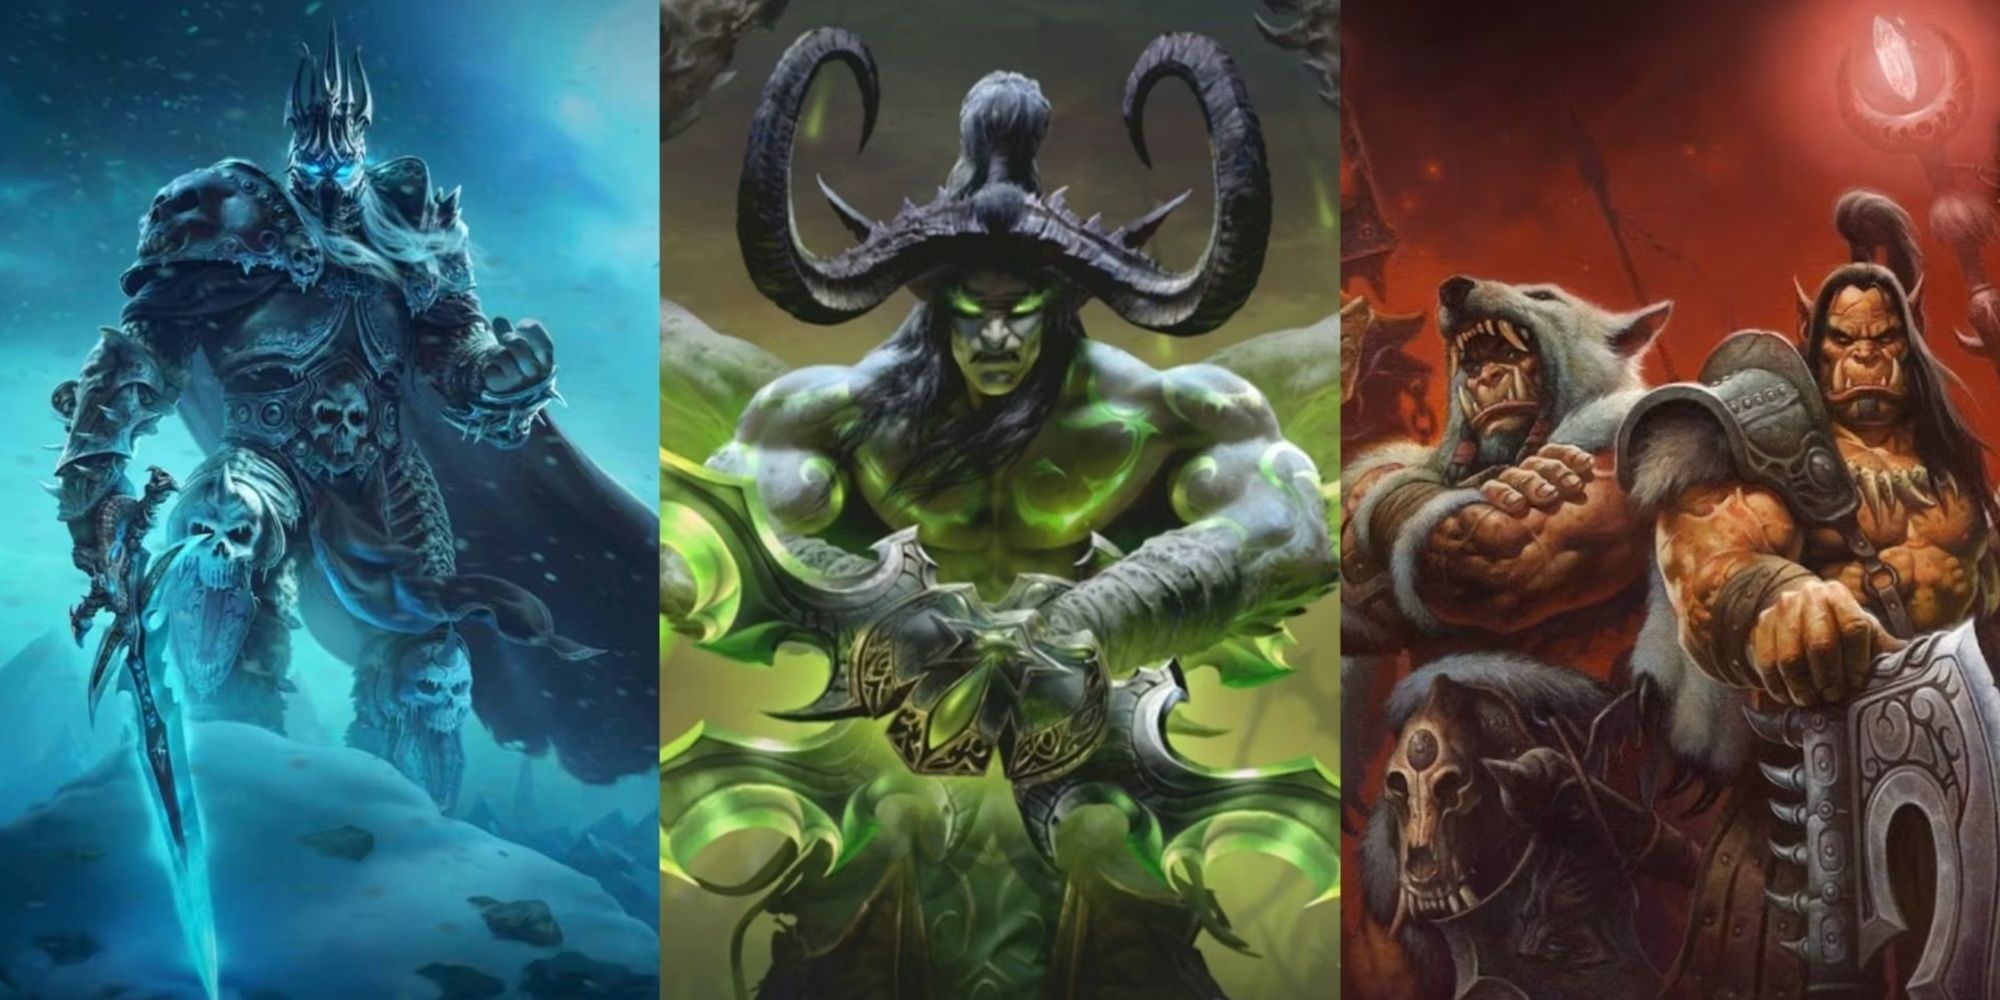 World of Warcraft artwork mix with Wrath of the Lich King, The Burning Crusade and warlords of Draenor artwork